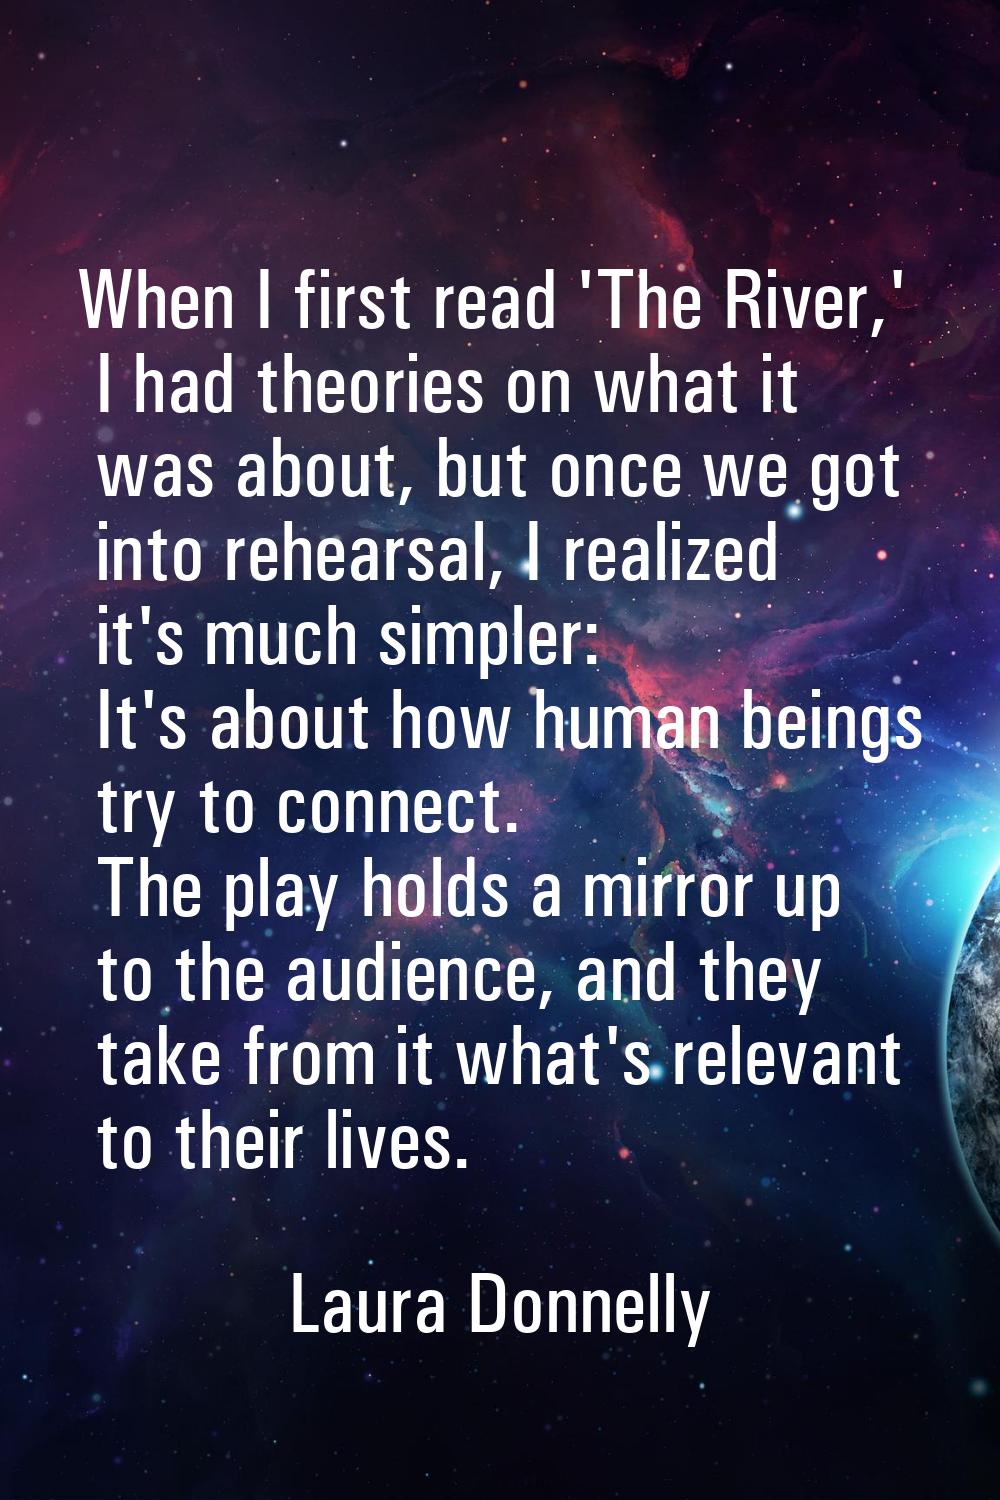 When I first read 'The River,' I had theories on what it was about, but once we got into rehearsal,